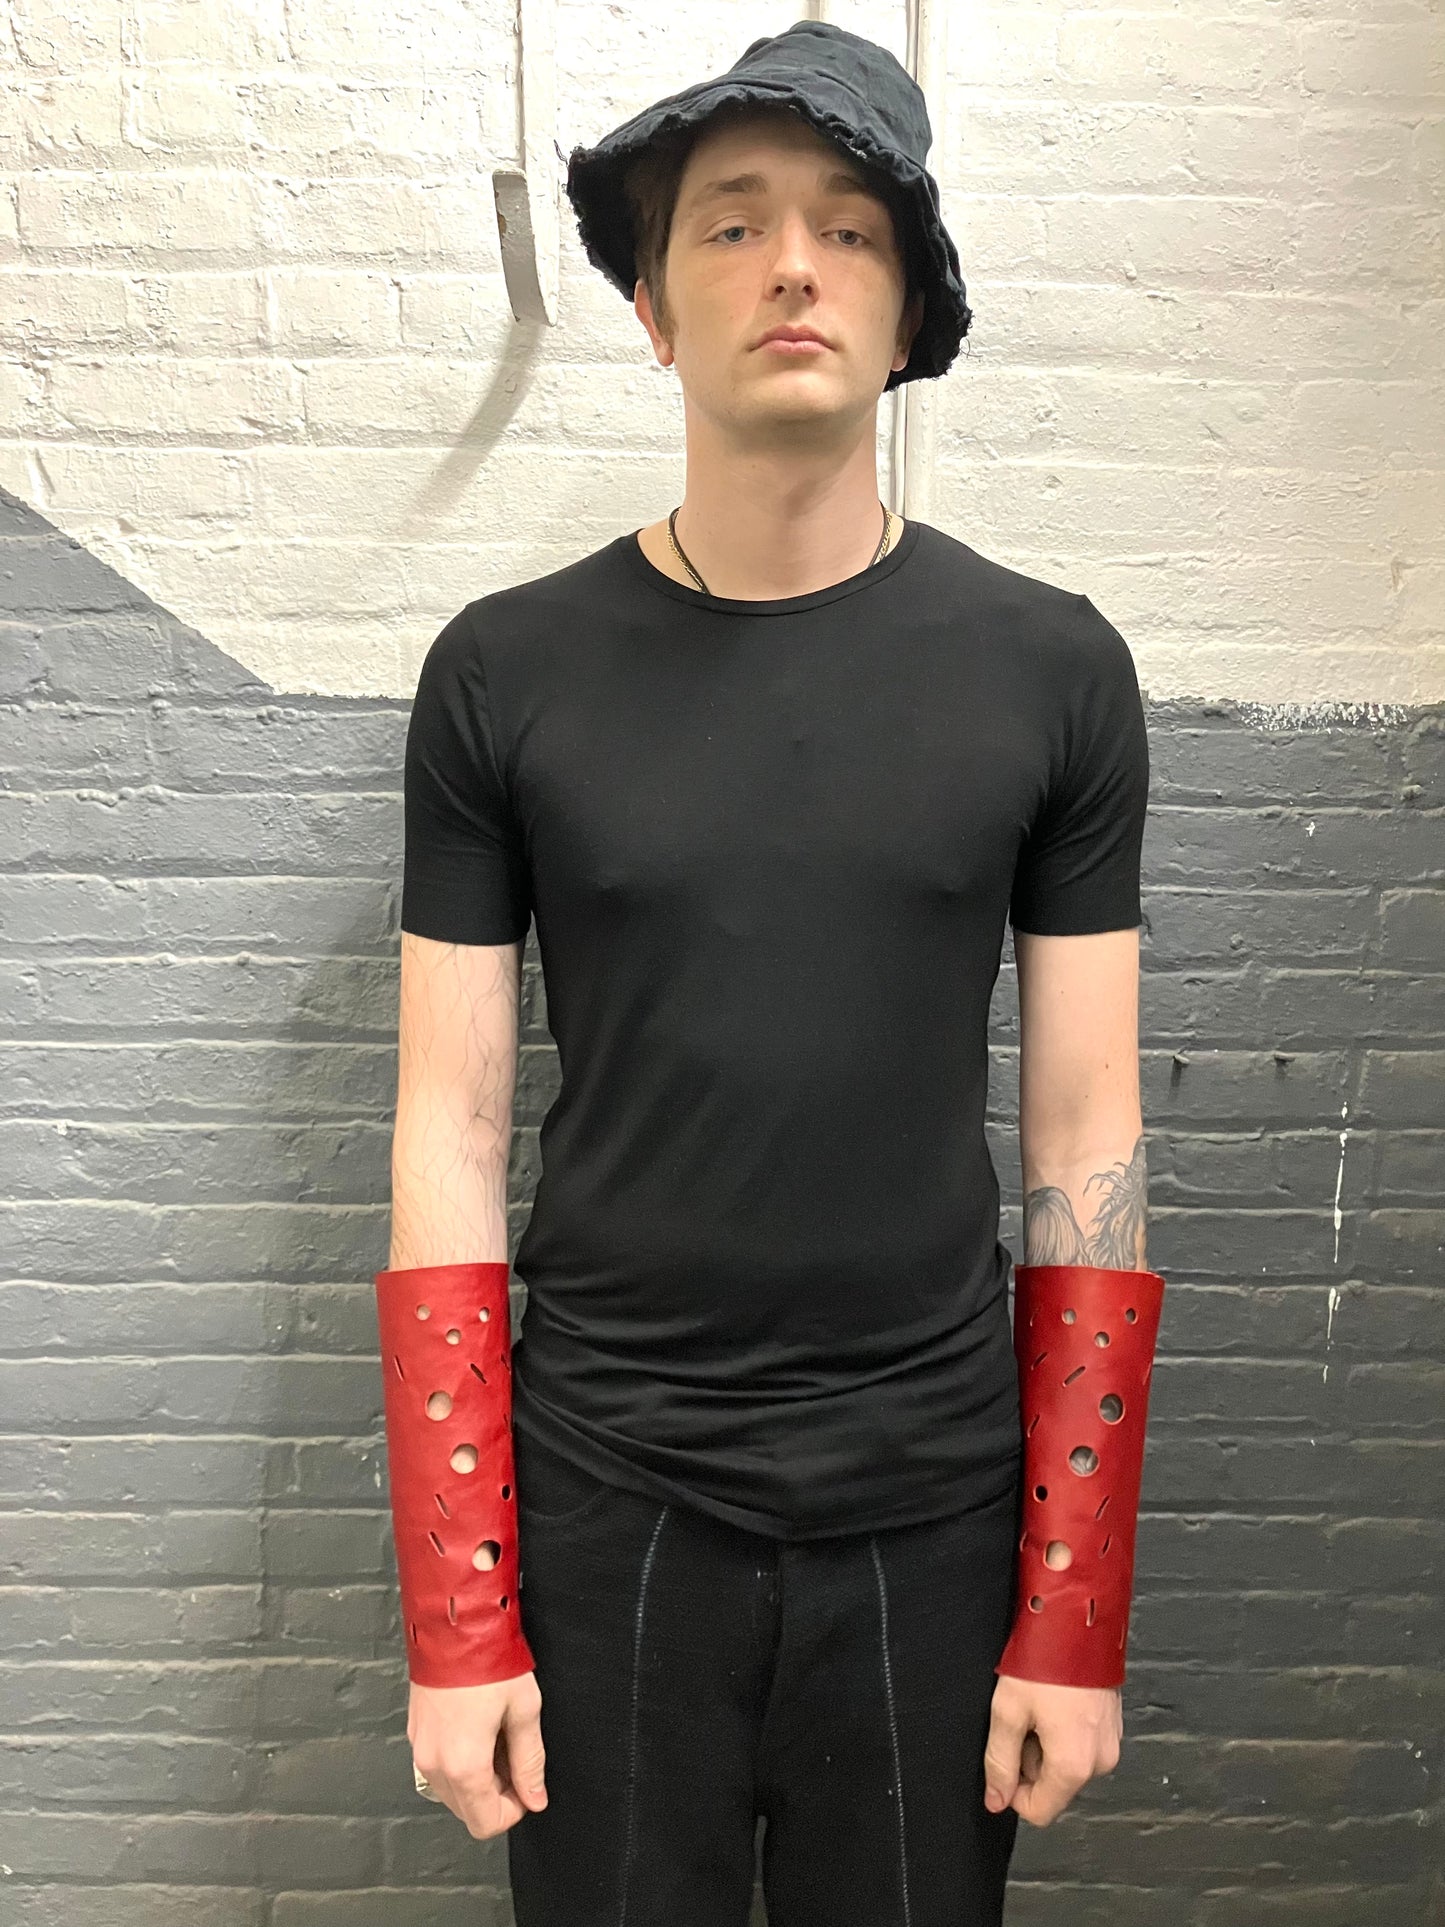 SS23 || PUNCHED ARM BANDS - RED